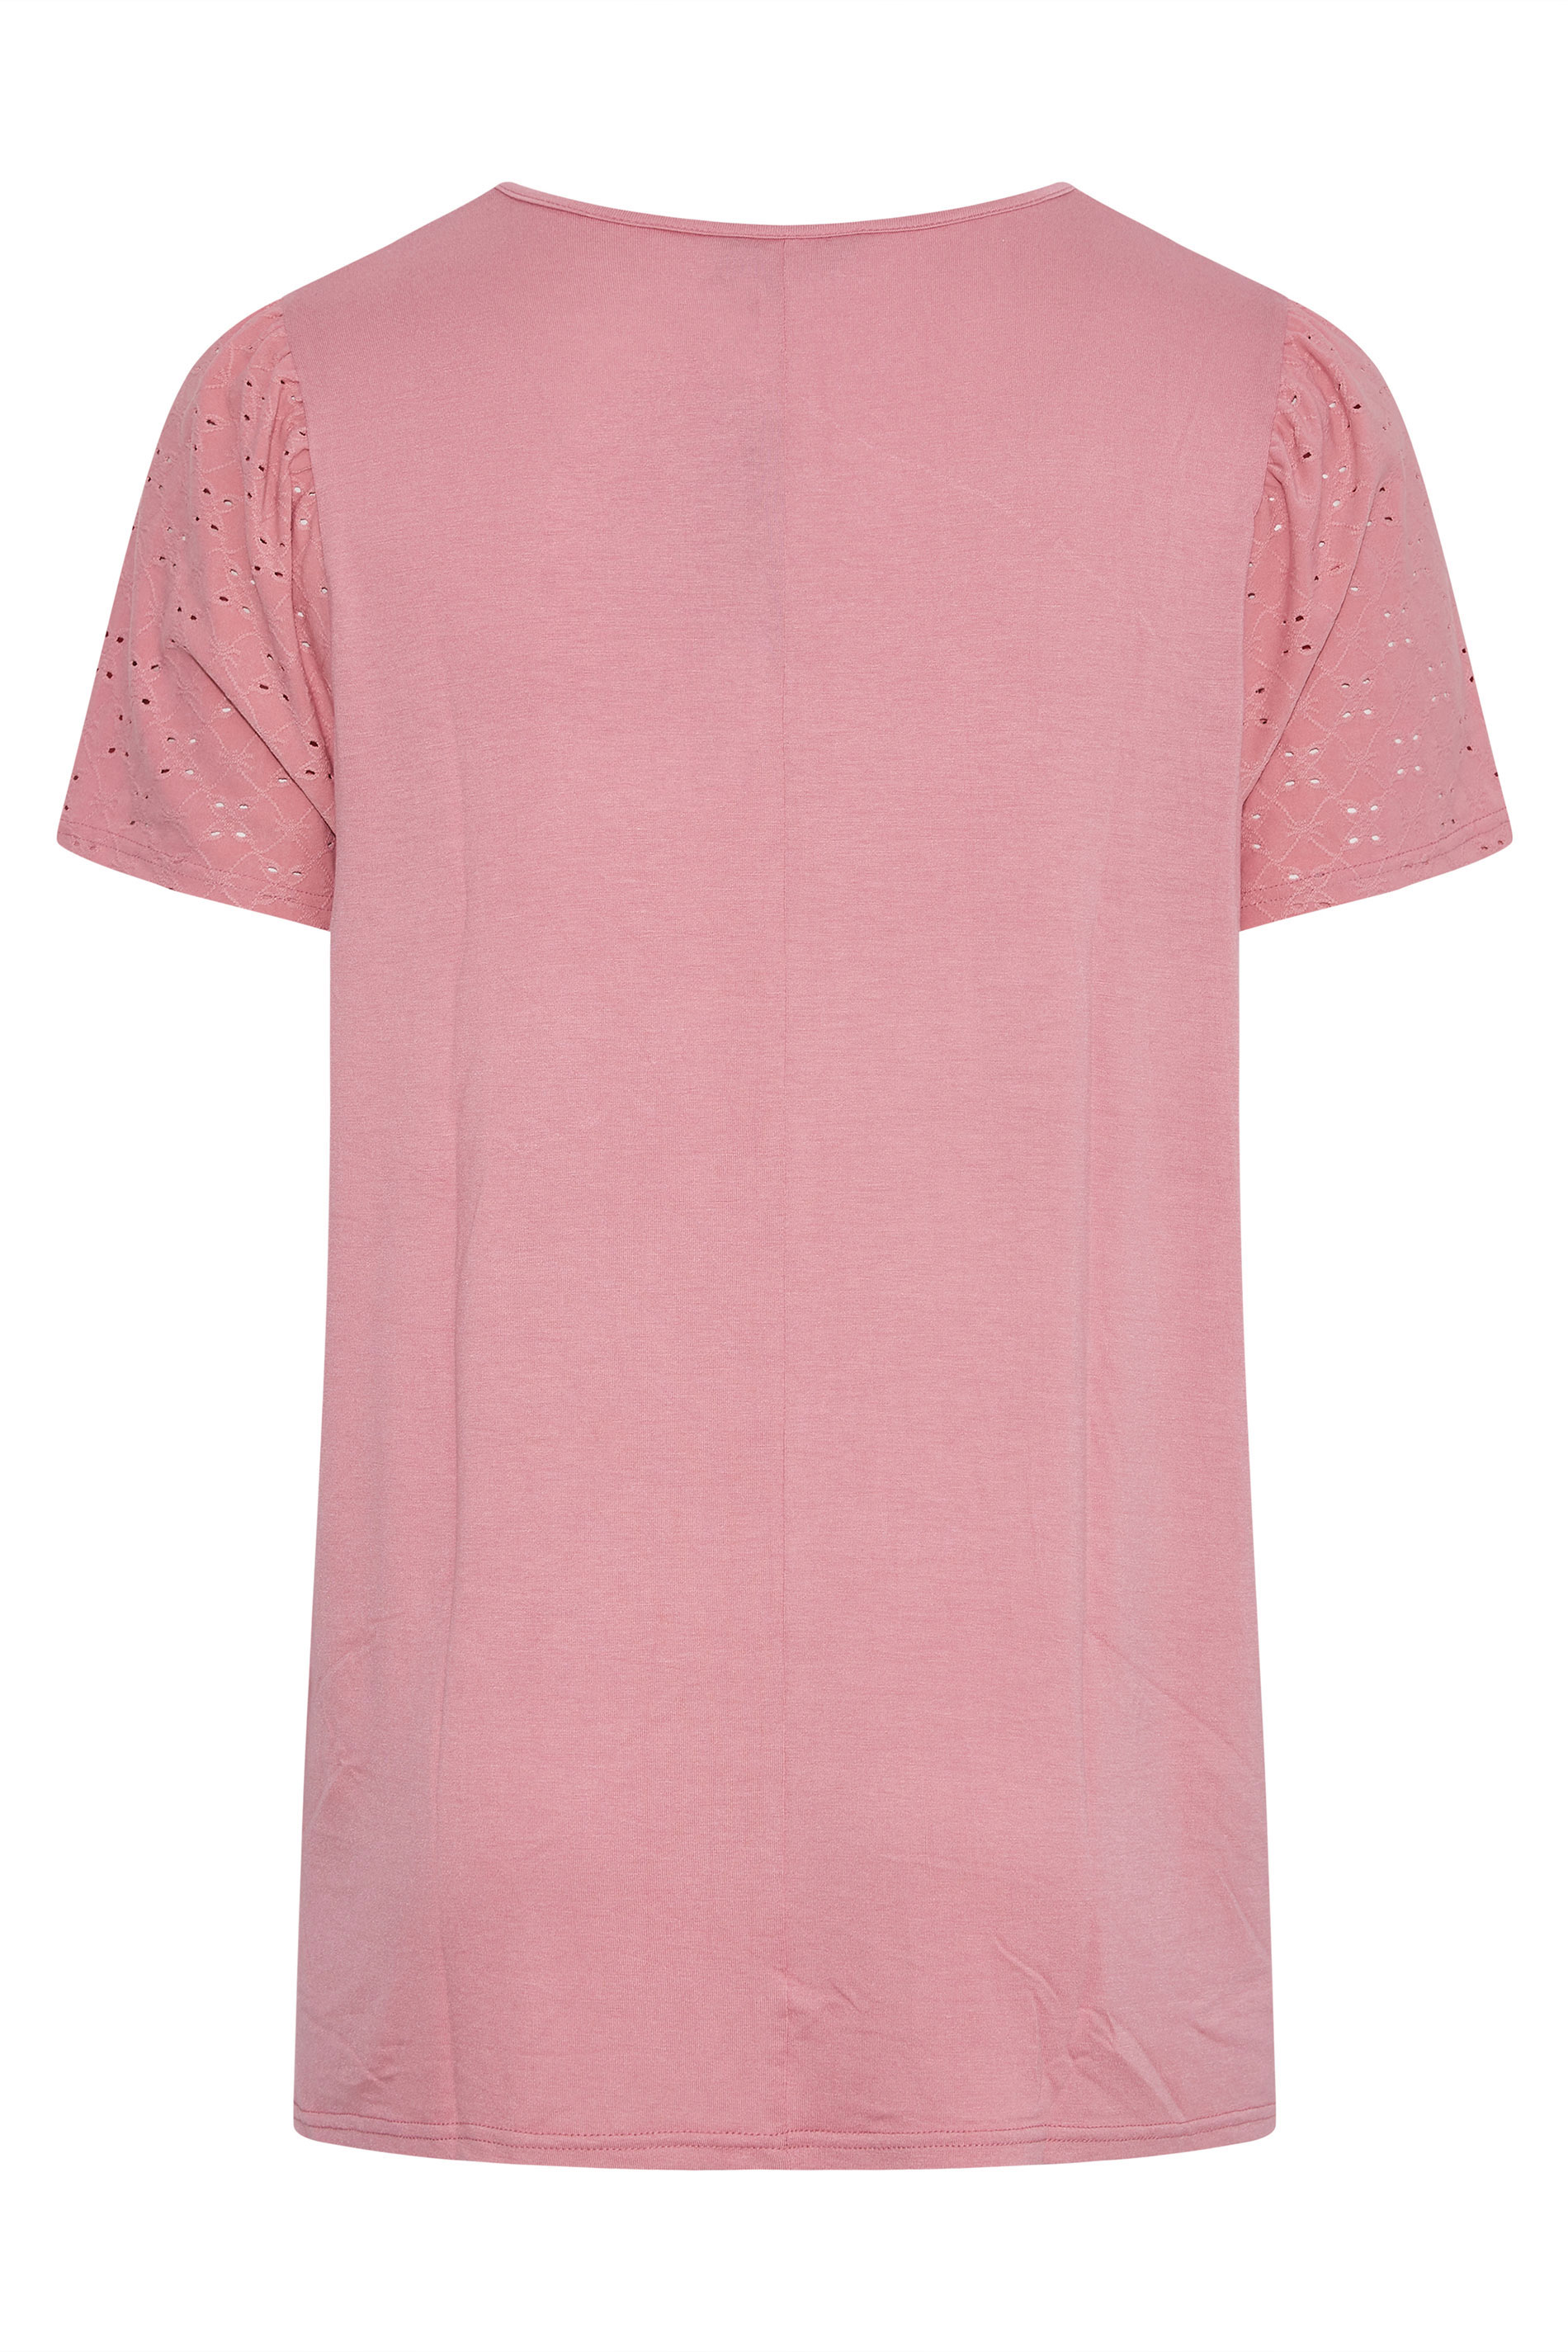 Grande taille  Tops Grande taille  T-Shirts | LIMITED COLLECTION - T-Shirt Rose Manches Broderie Anglaise - YK07768